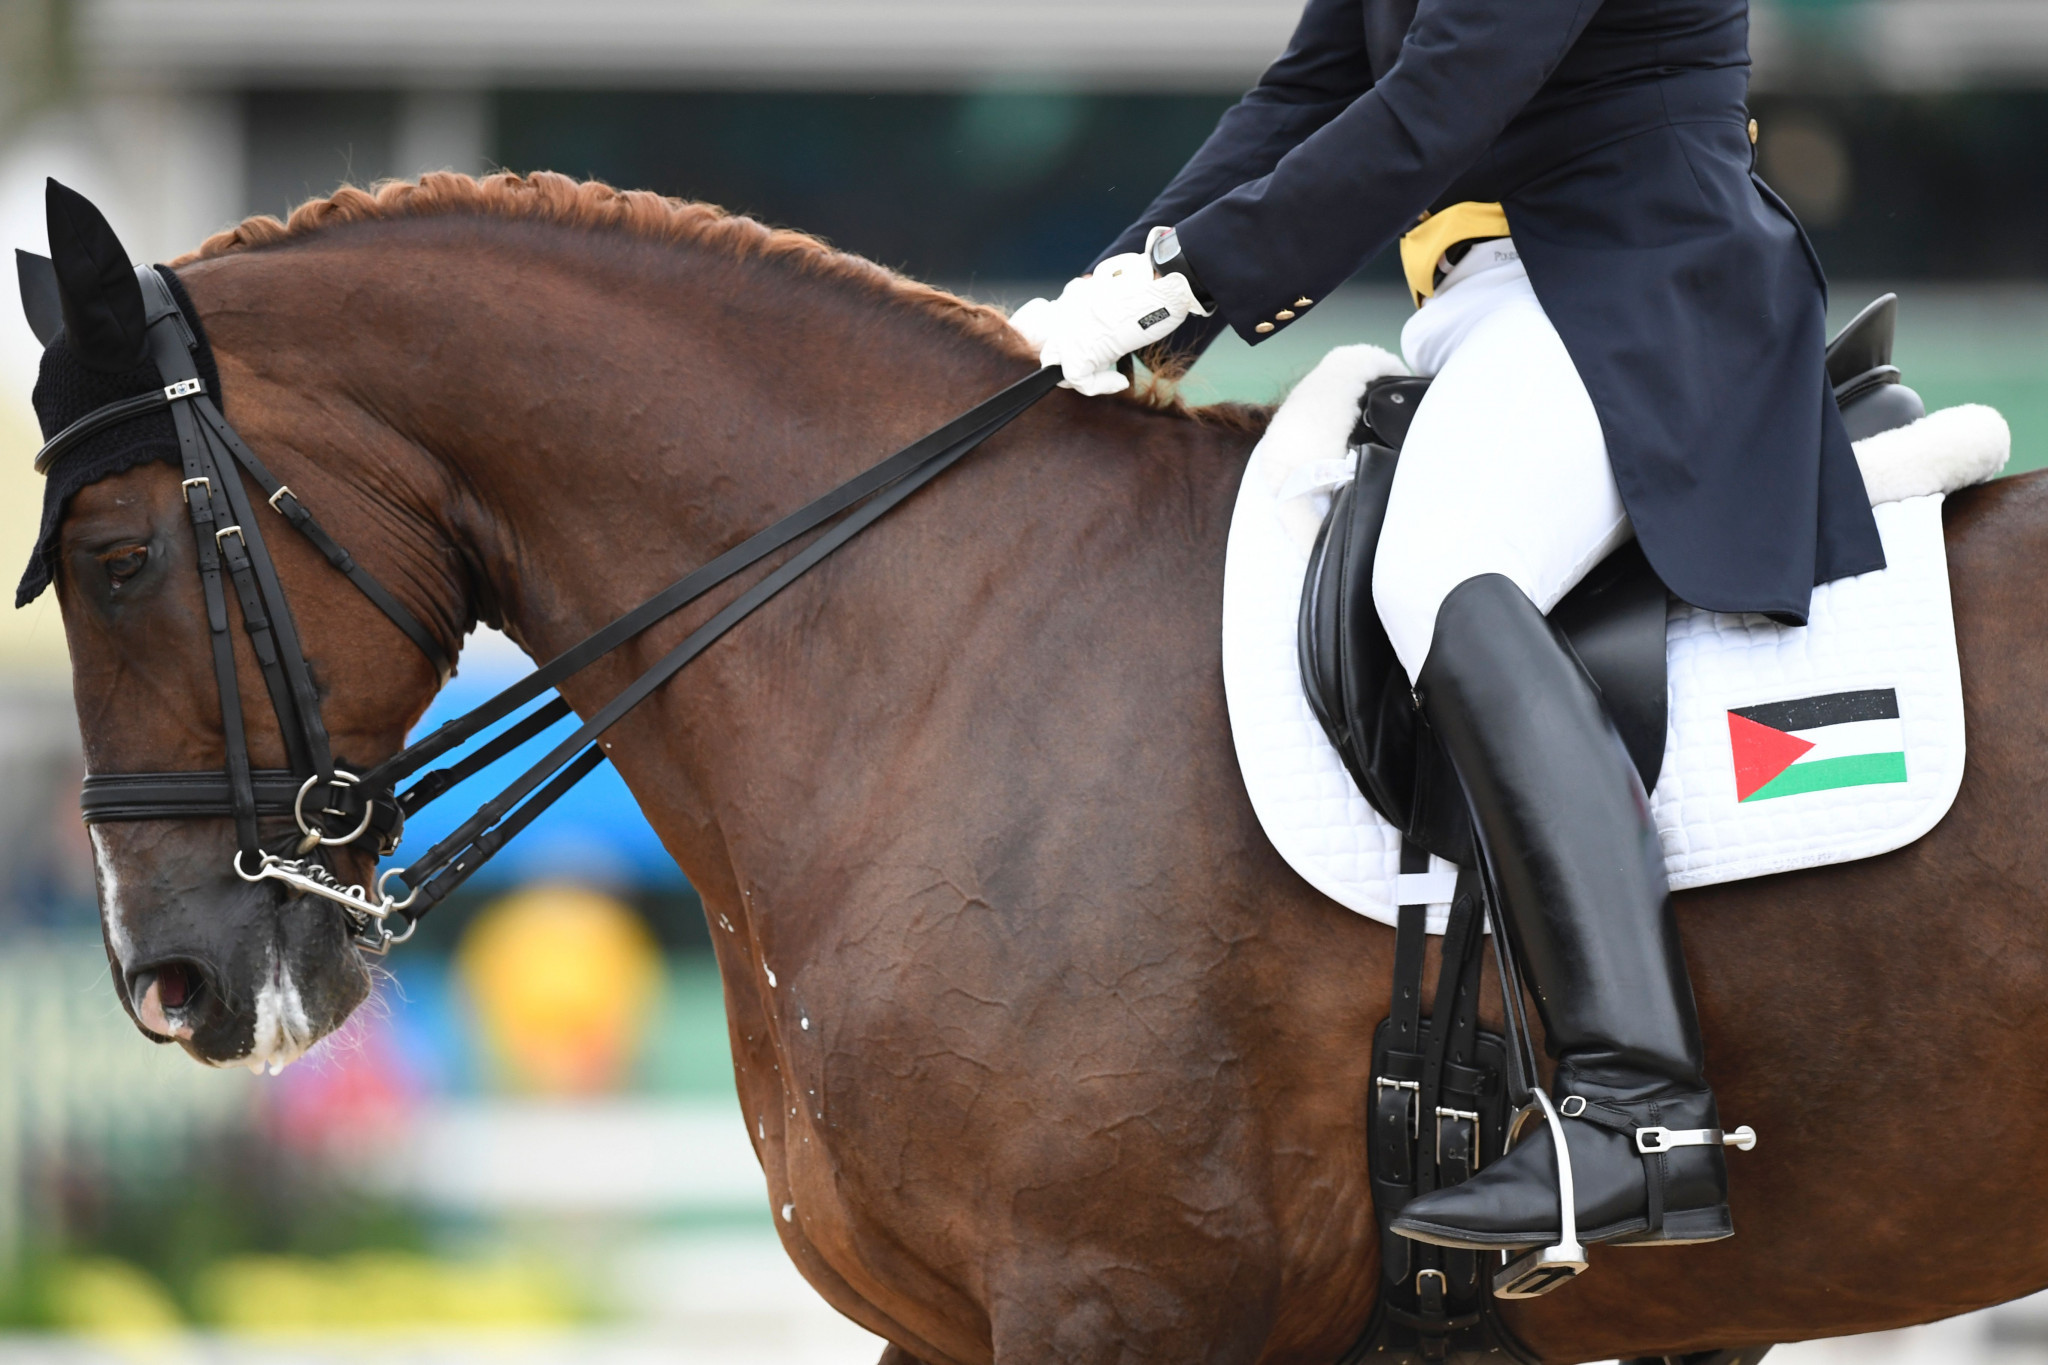 Christian Zimmermann is the only athlete who has represented Palestine in equestrian at the Olympics to date ©Getty Images